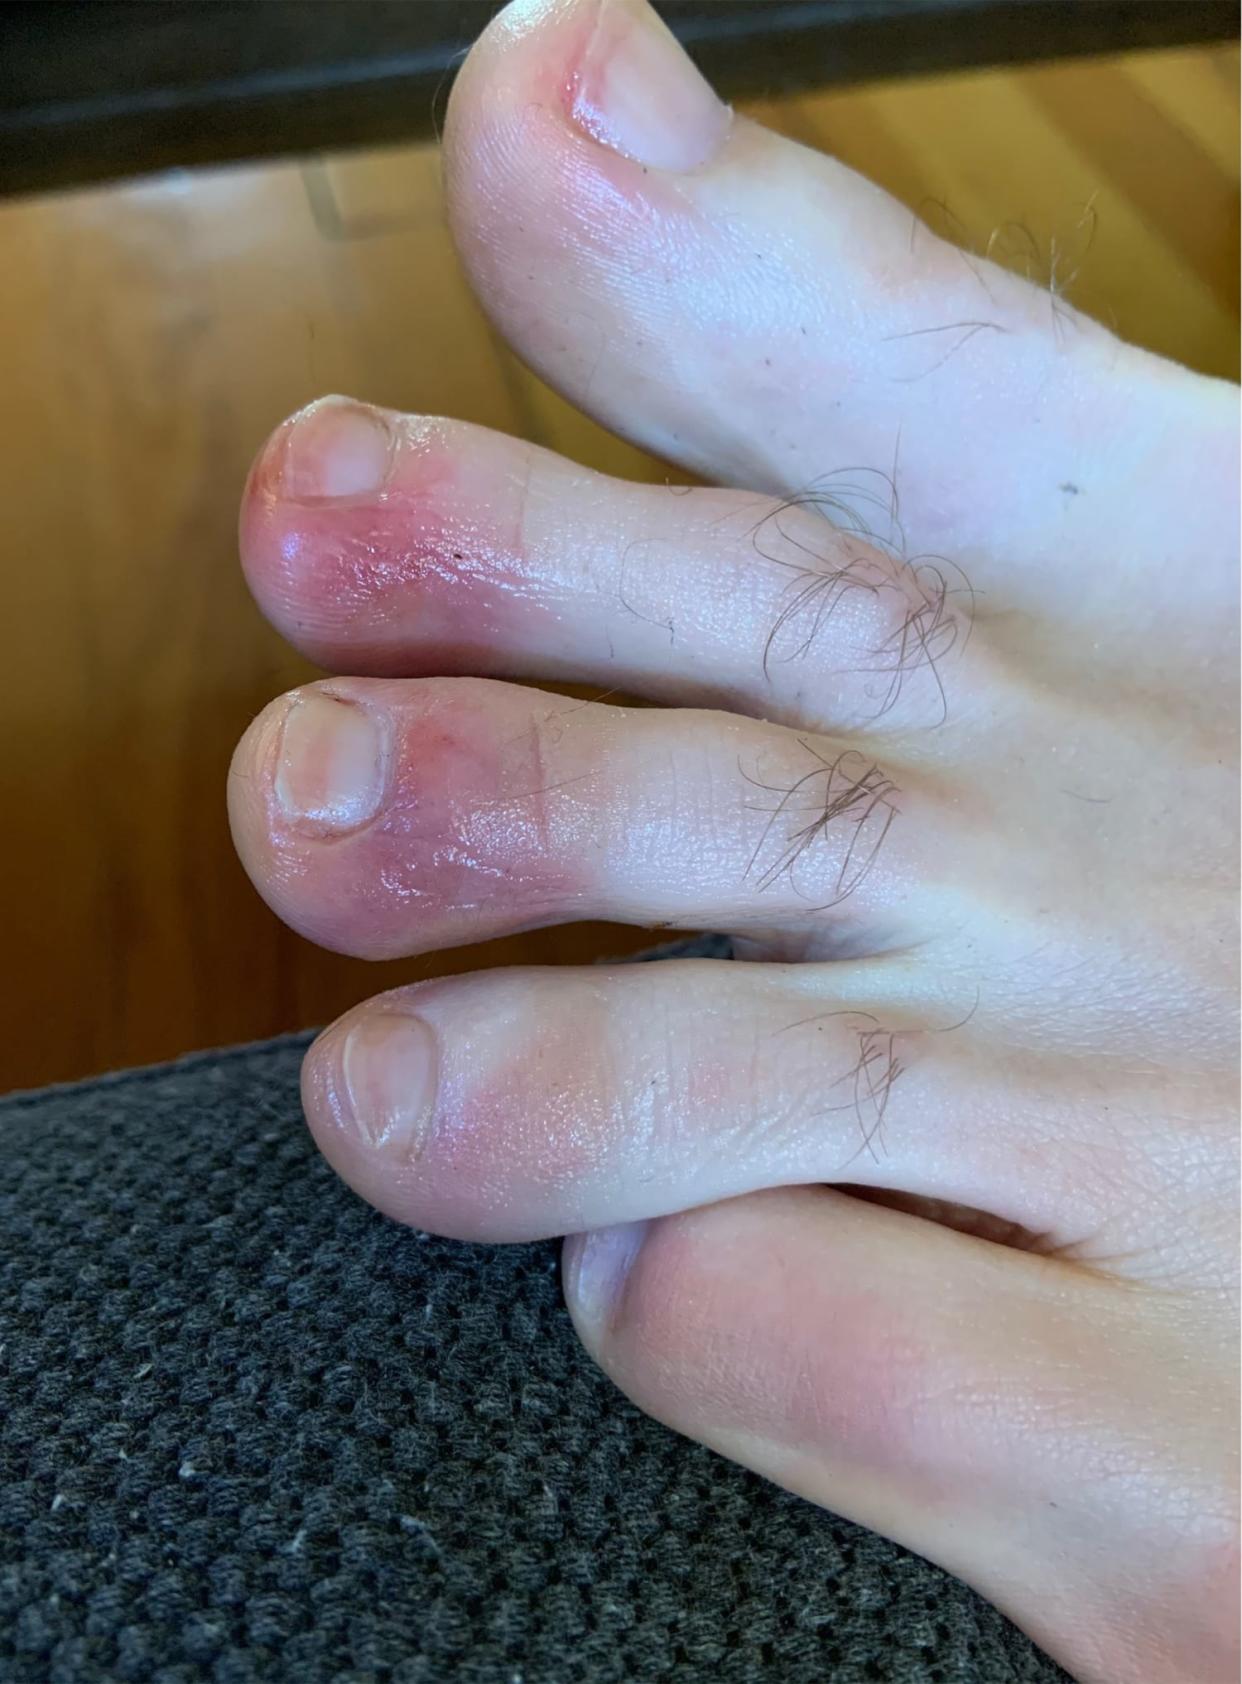 There is currently no known treatment to address Covid toes. (Anonymous patient)